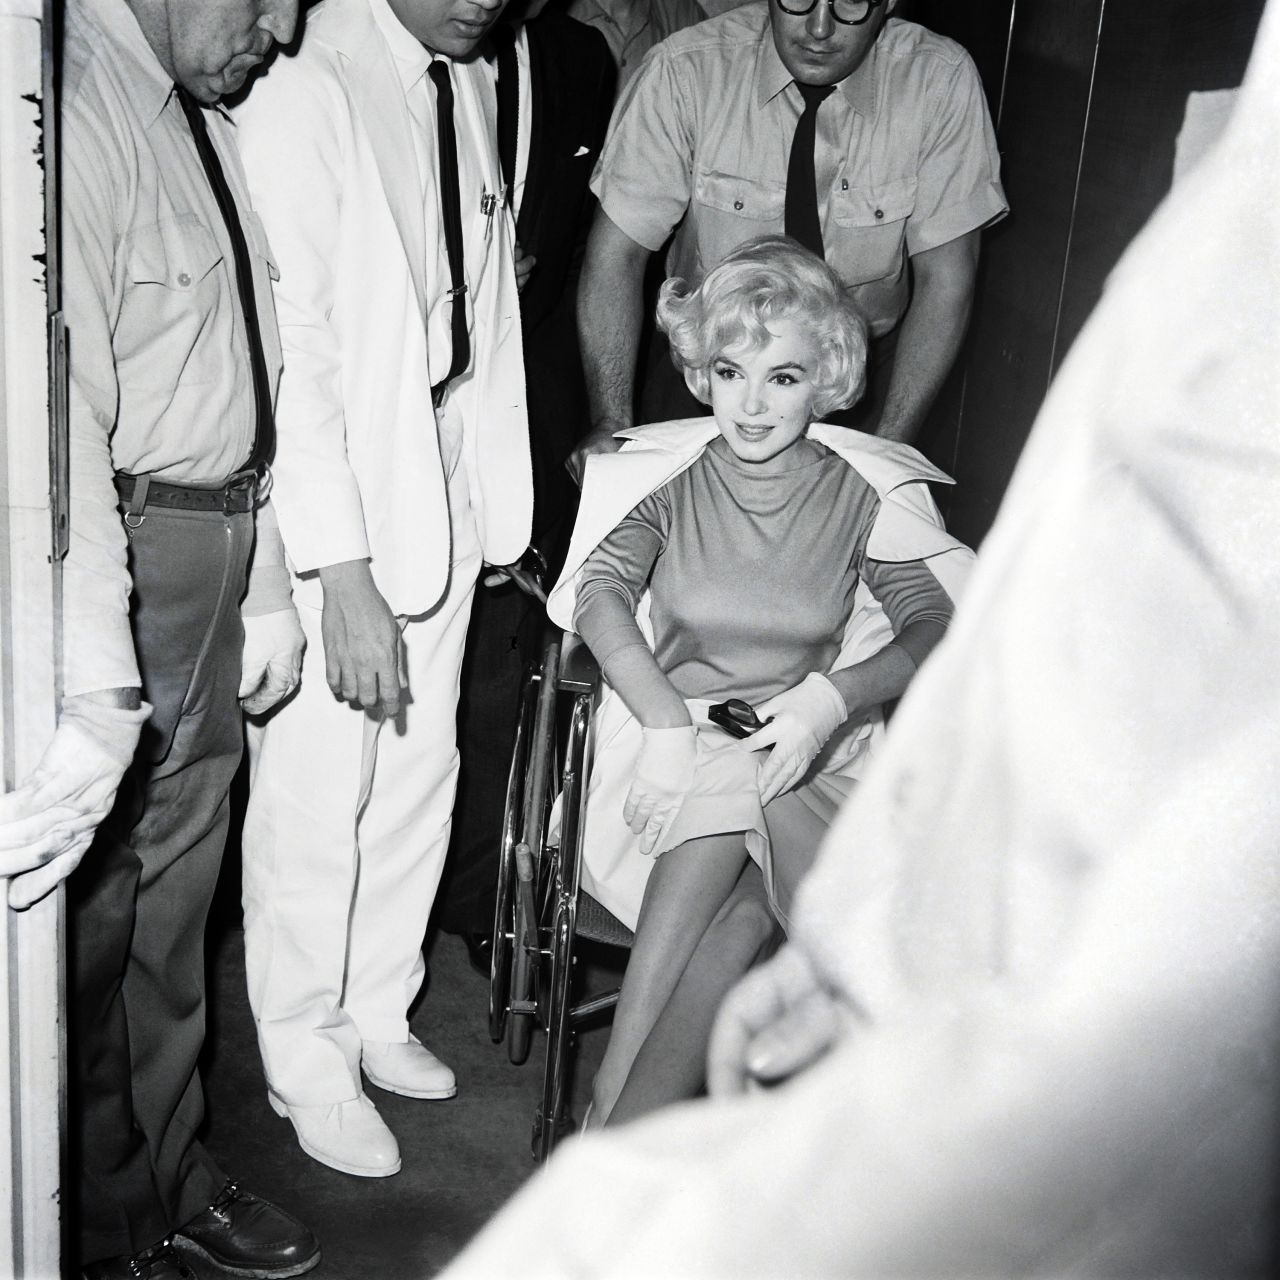 Monroe leaves Polyclinic Hospital in New York after a gall bladder surgery in 1961. As she was rolled out in a wheel chair, she was surrounded by crowds.